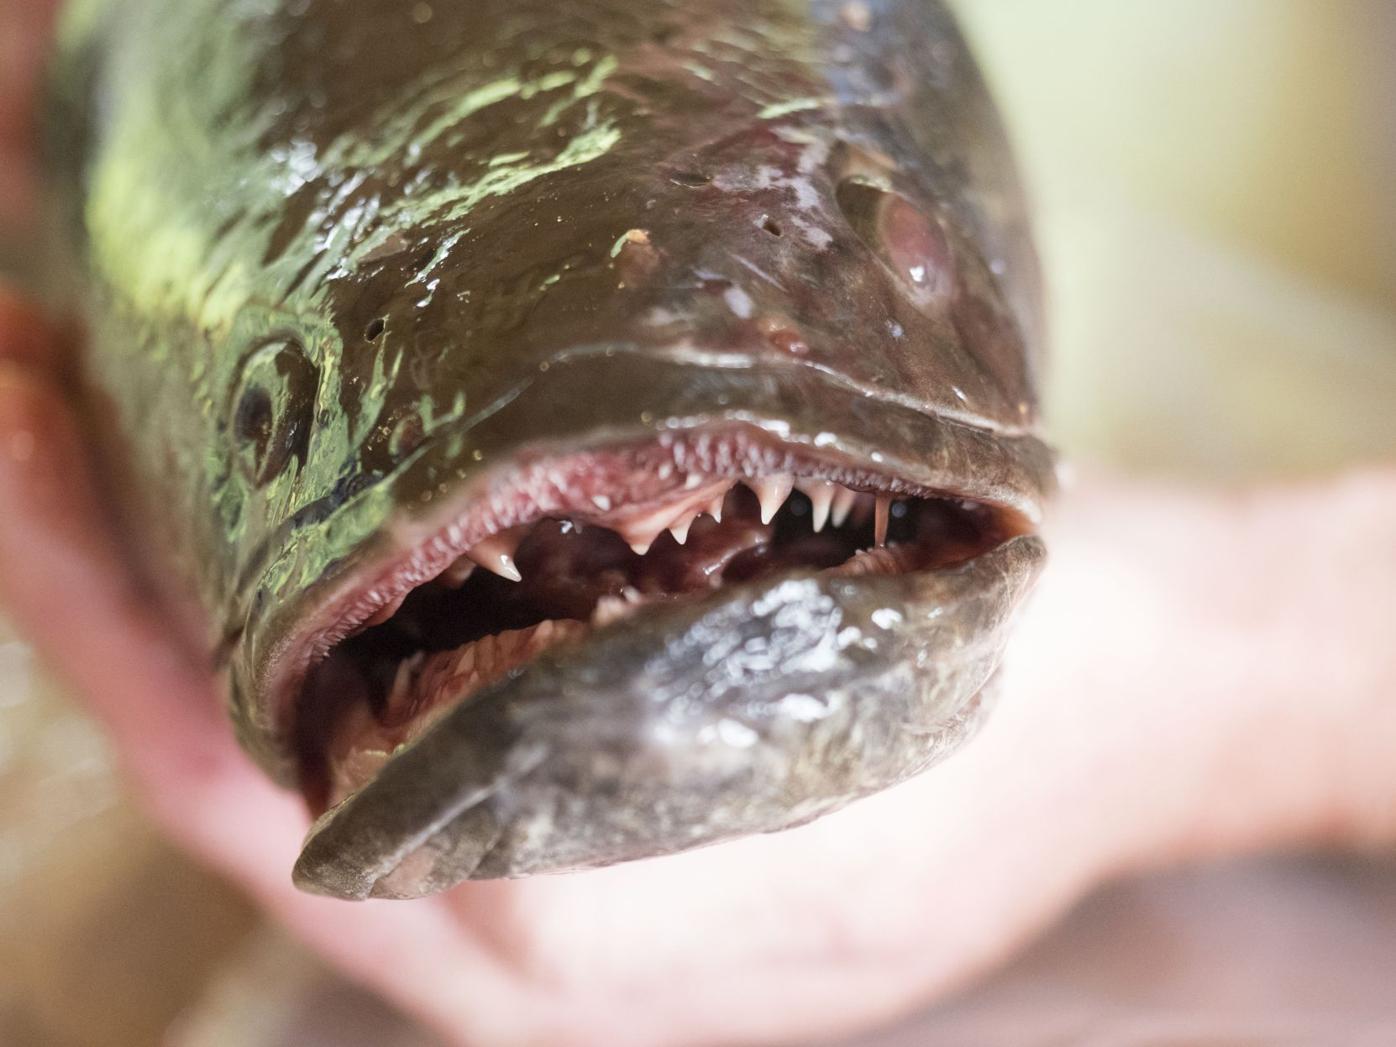 Invasive 'Frankenfish' confirmed in stretch of Susquehanna River